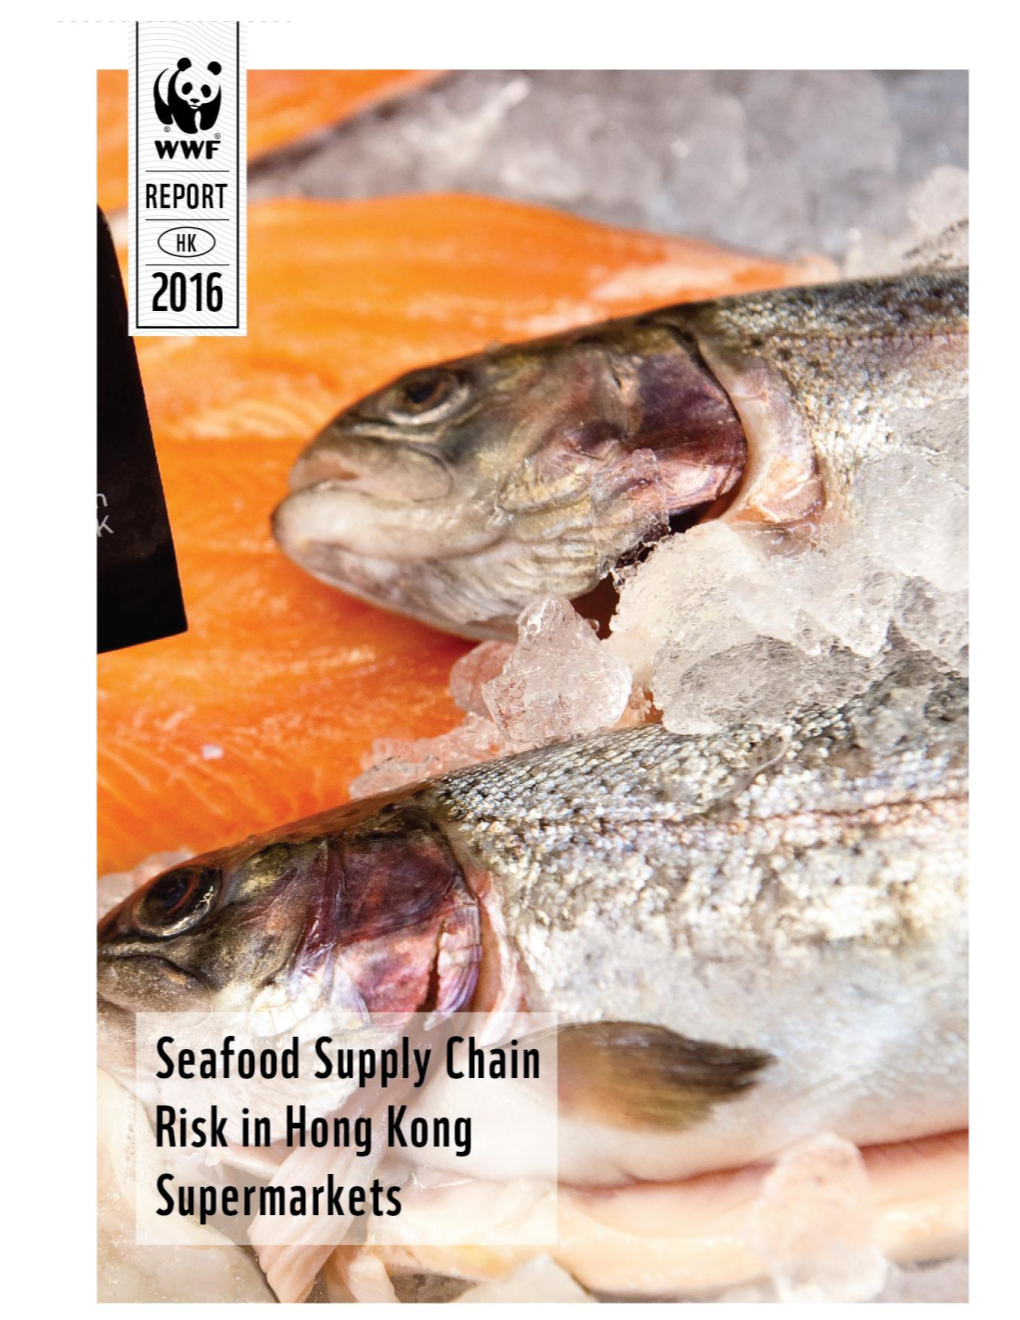 Seafood Supply Chain Risk in Hong Kong Supermarkets